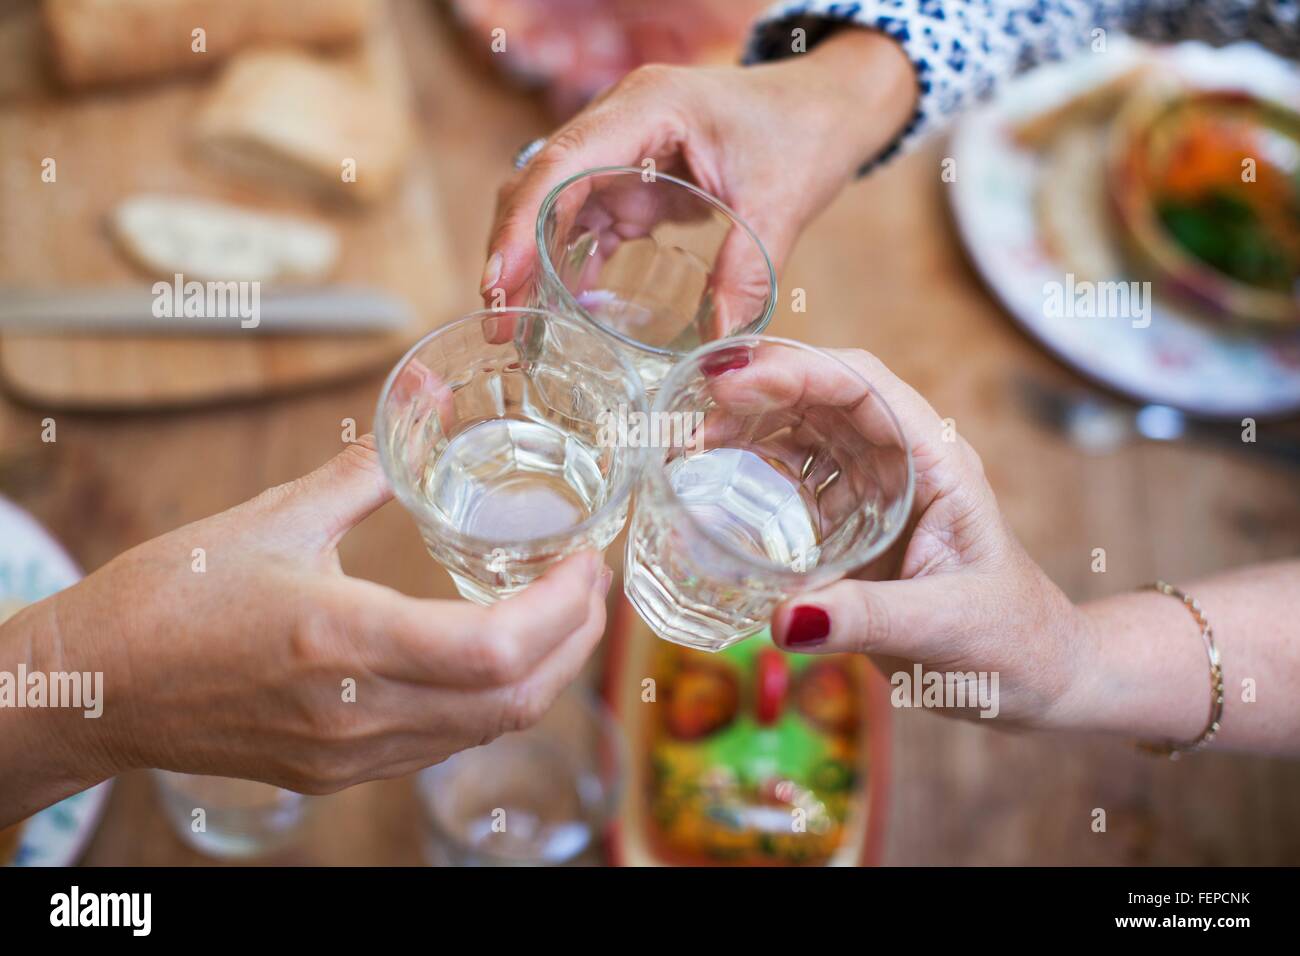 Three women having lunch together at home, making a toast, close-up of glasses Stock Photo